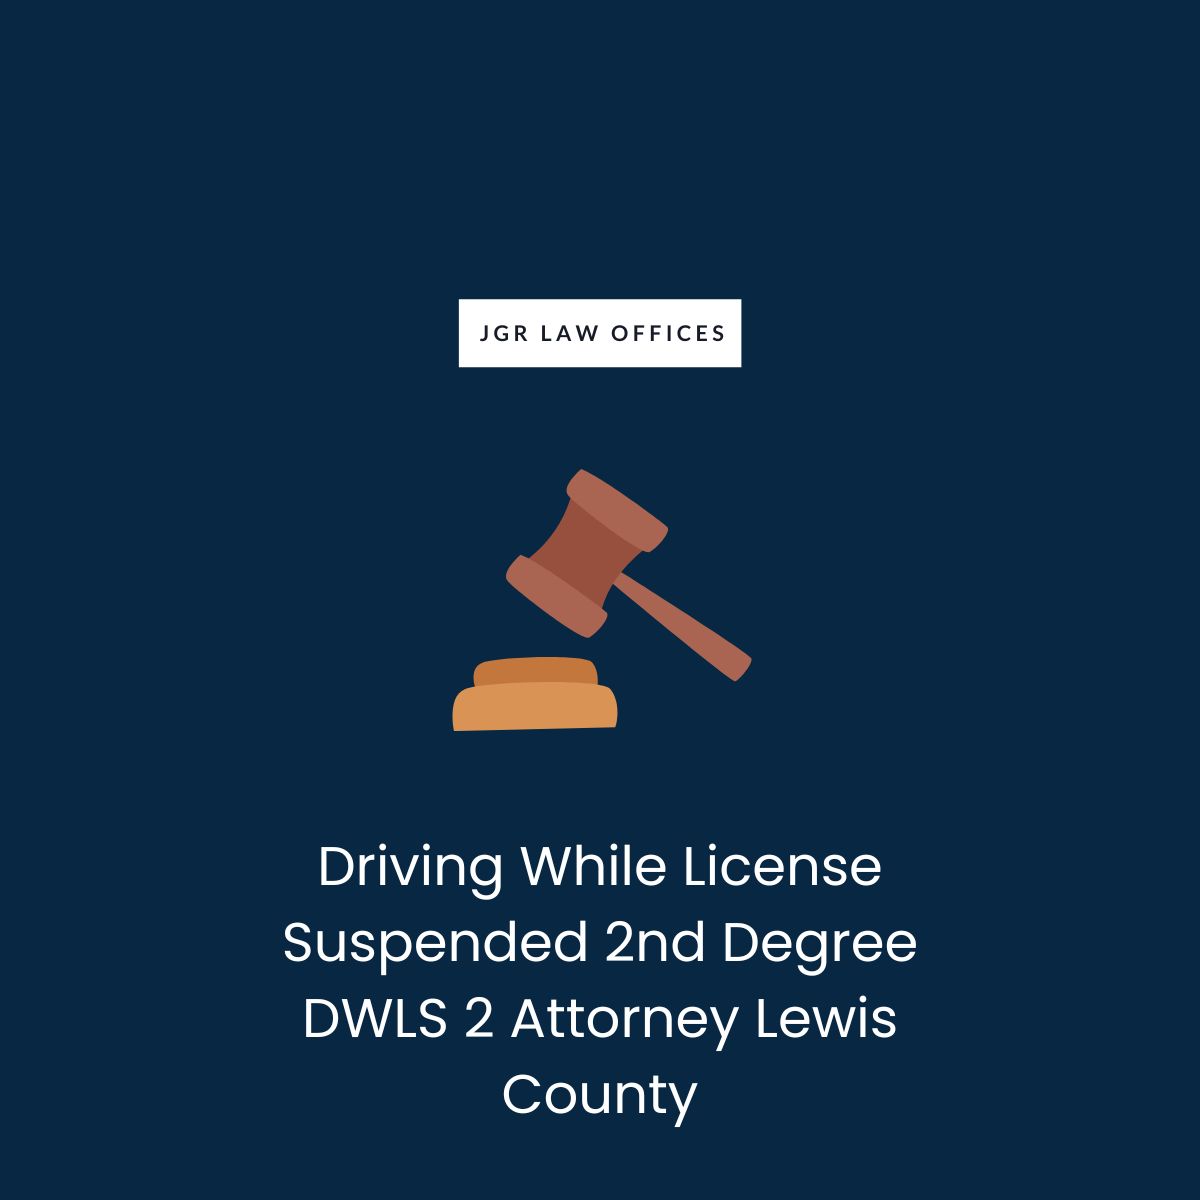 Driving While License Suspended 2nd Degree DWLS 2 Attorney Lewis County